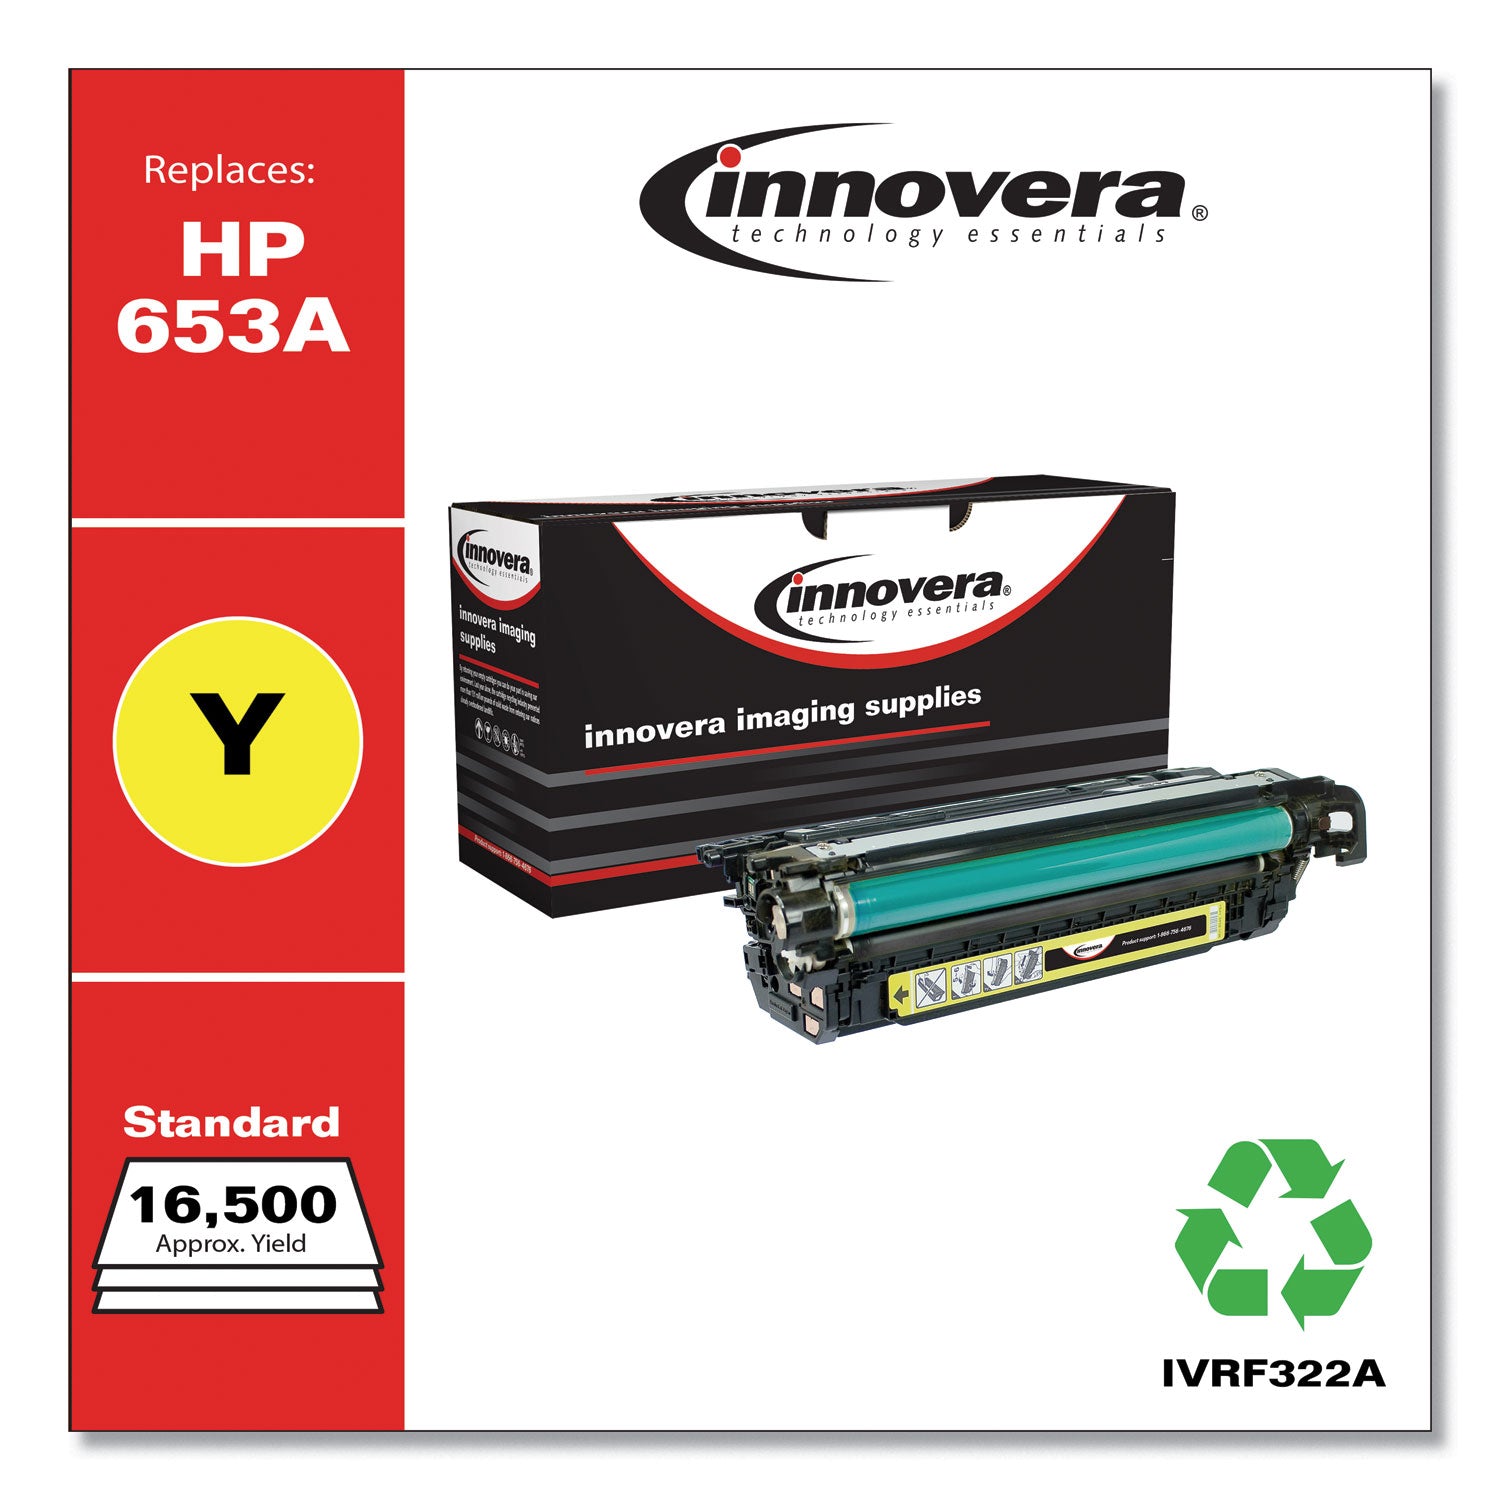 remanufactured-yellow-toner-replacement-for-653a-cf322a-16500-page-yield_ivrf322a - 2